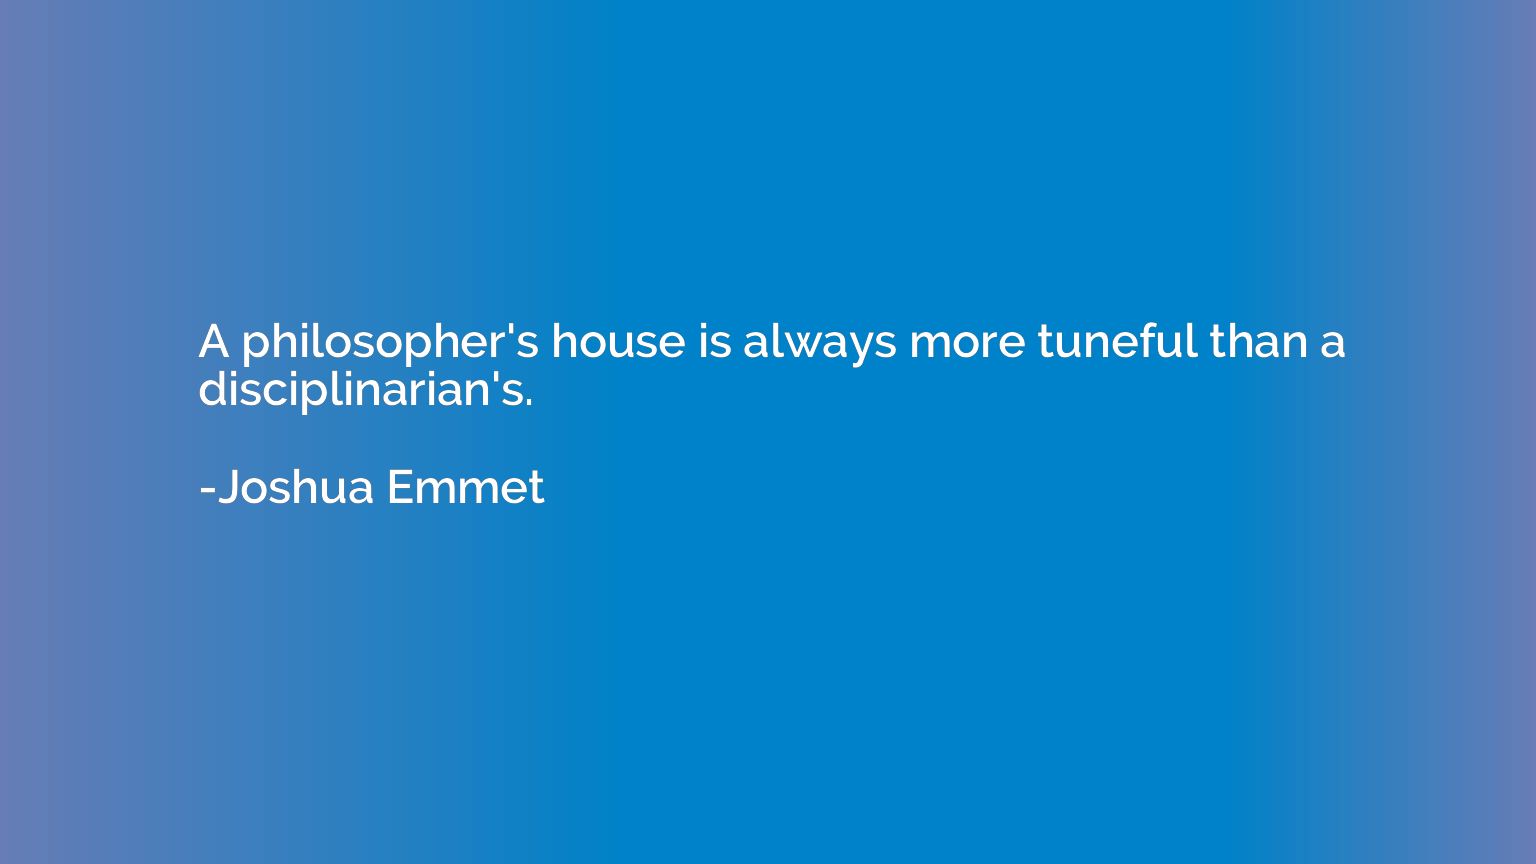 A philosopher's house is always more tuneful than a discipli